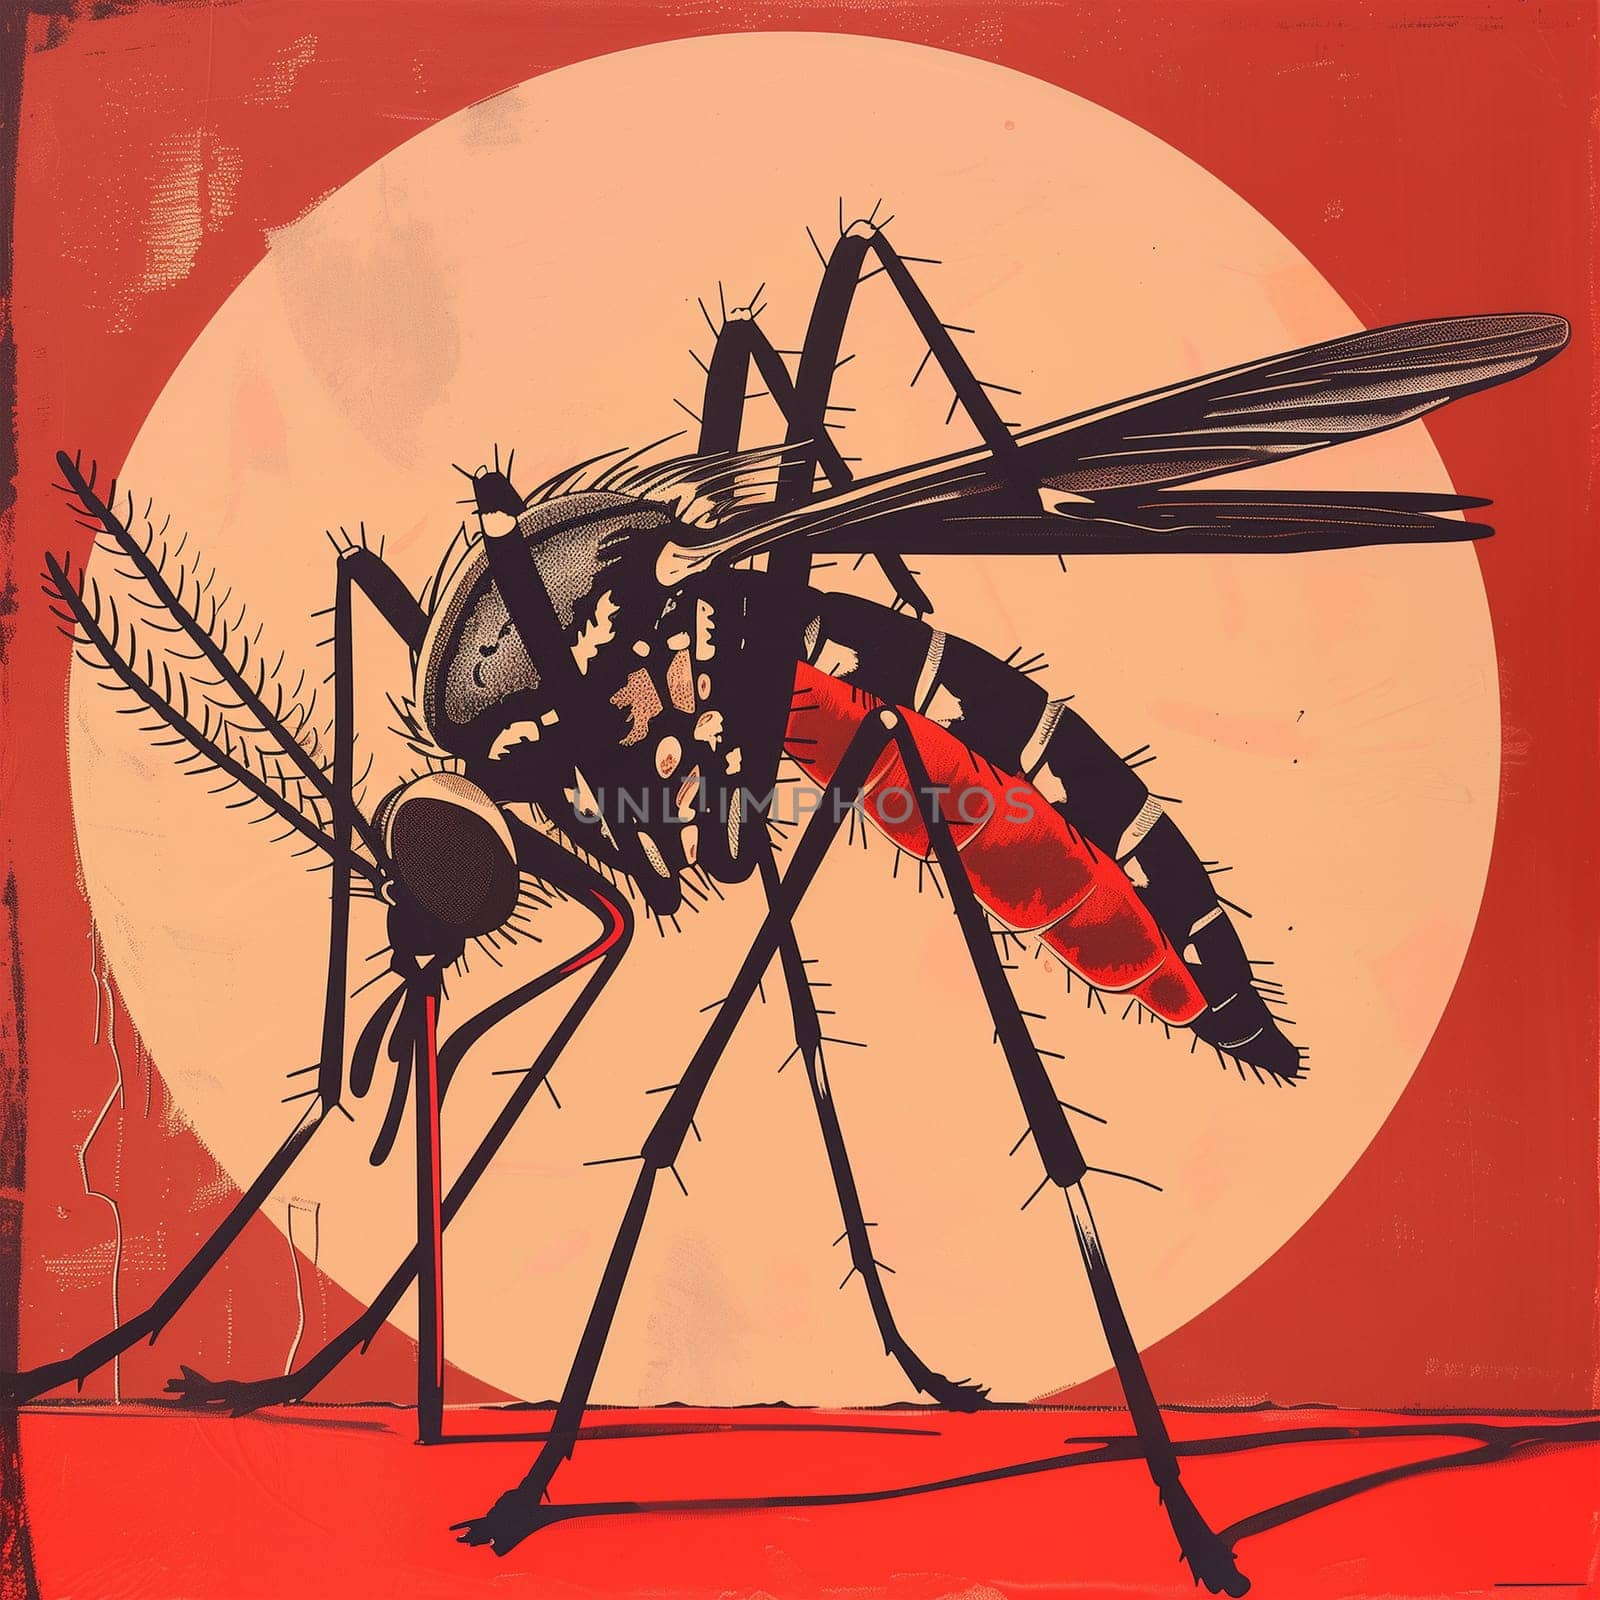 Close Up of Mosquito on Red Background by Sd28DimoN_1976